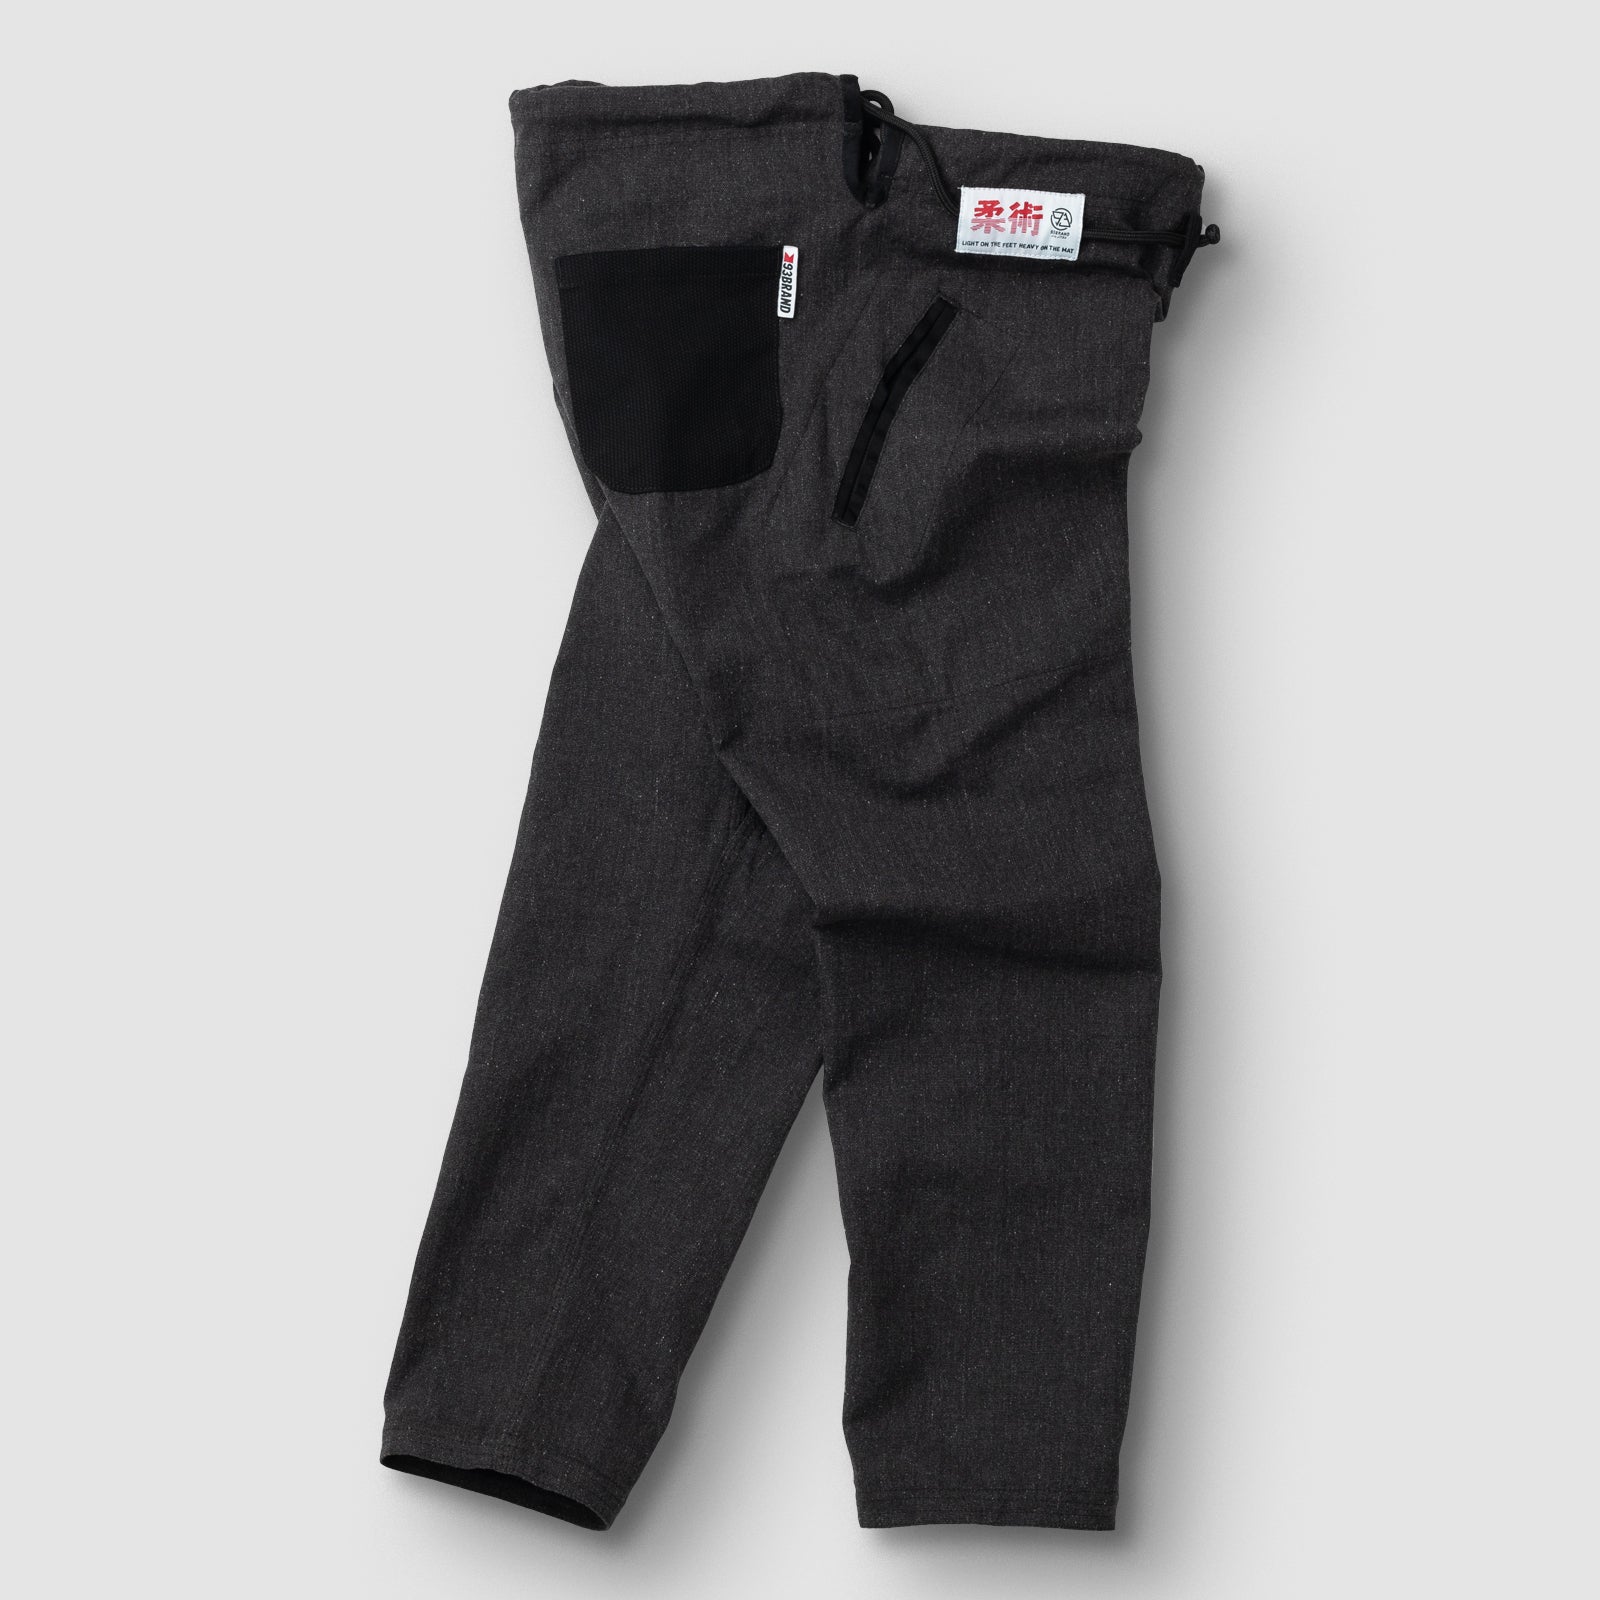 JUJI PANTS, THE ONLY PANTS YOU NEED *Click Shop Now to get your pair*